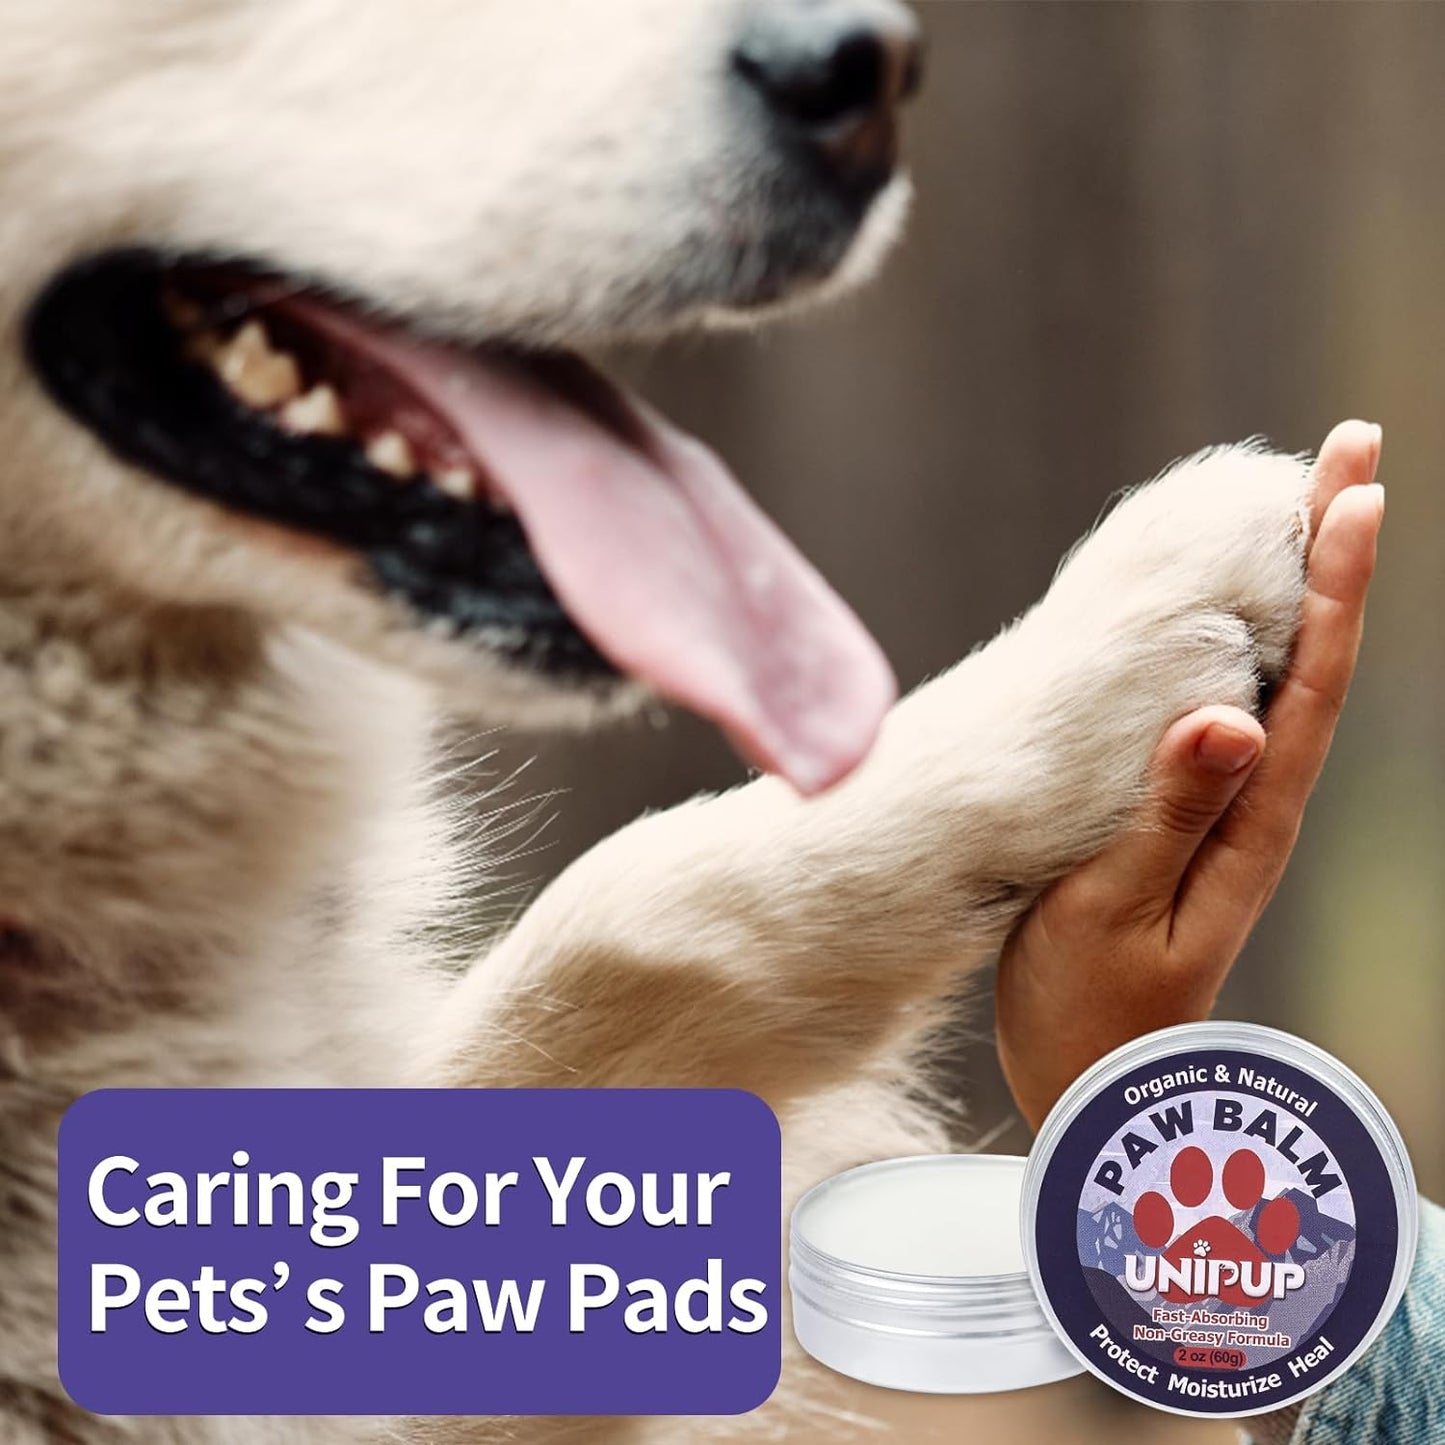 Dog Paw Pad Balm, Natural Dog Paw Protector, Heals & Moisturizes Dry Cracked Noses and Paws, 2.1Oz Natural Dog Nose Balm